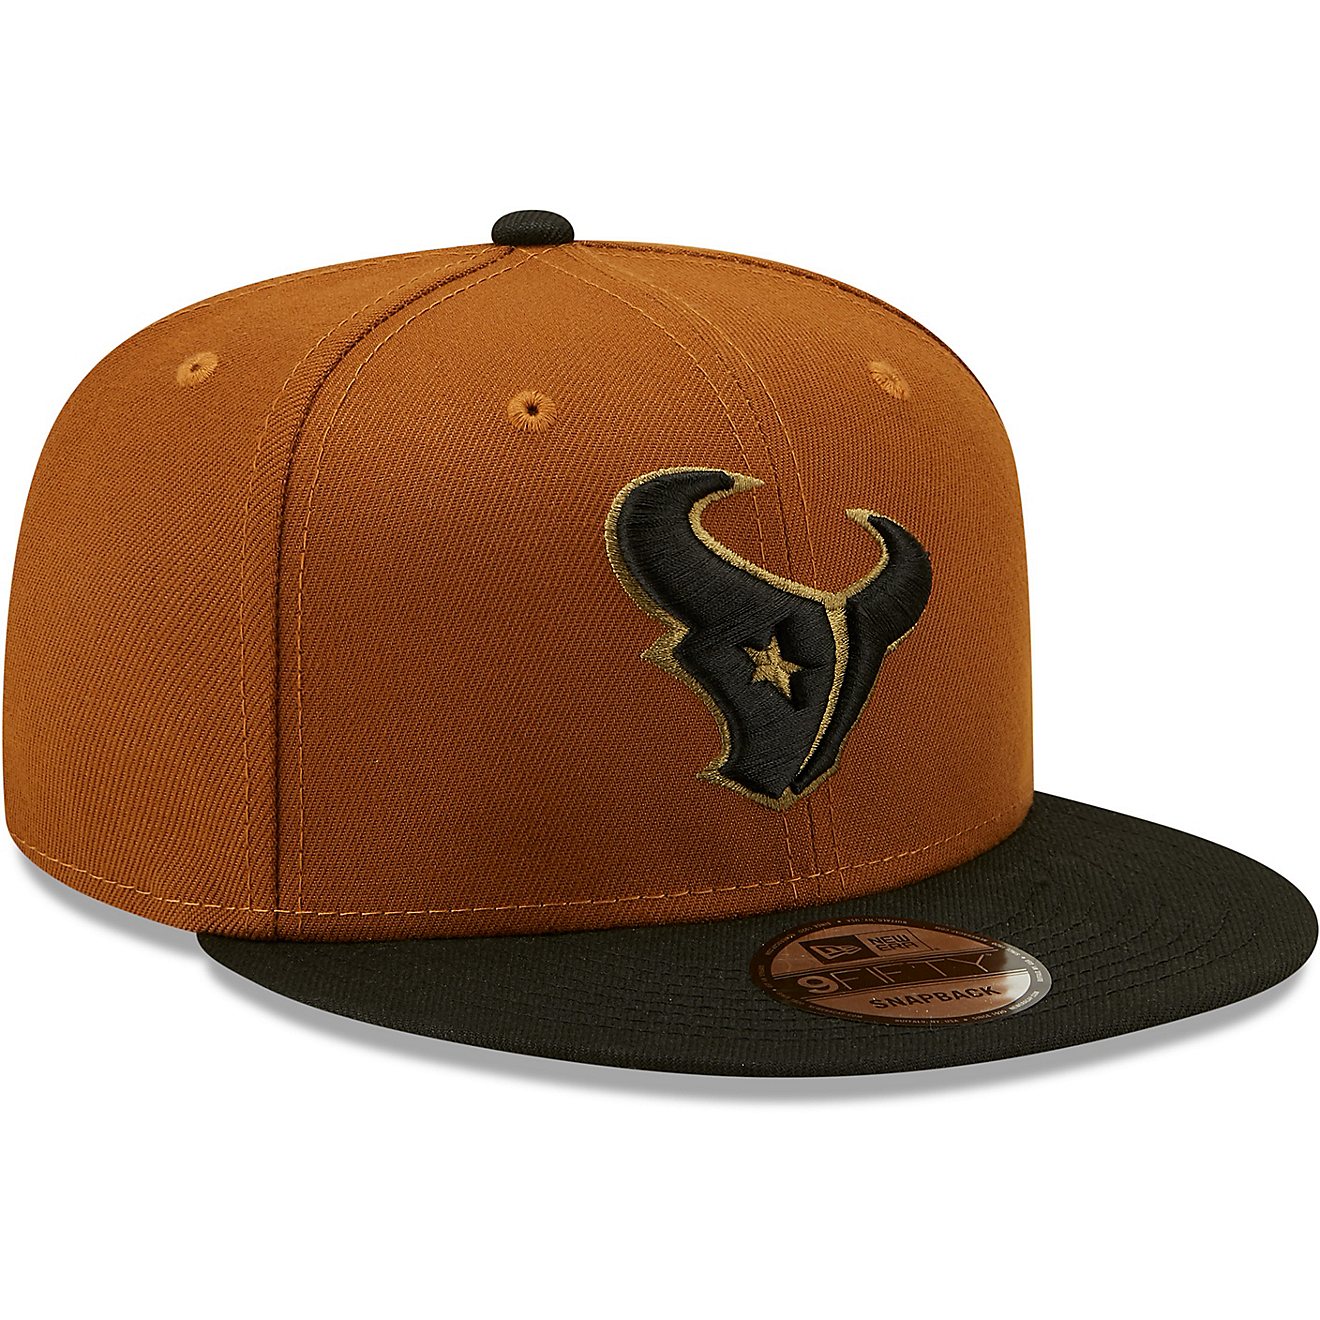 New Era Men's Houston Texans Colorpack 2T 9FIFTY Cap                                                                             - view number 4